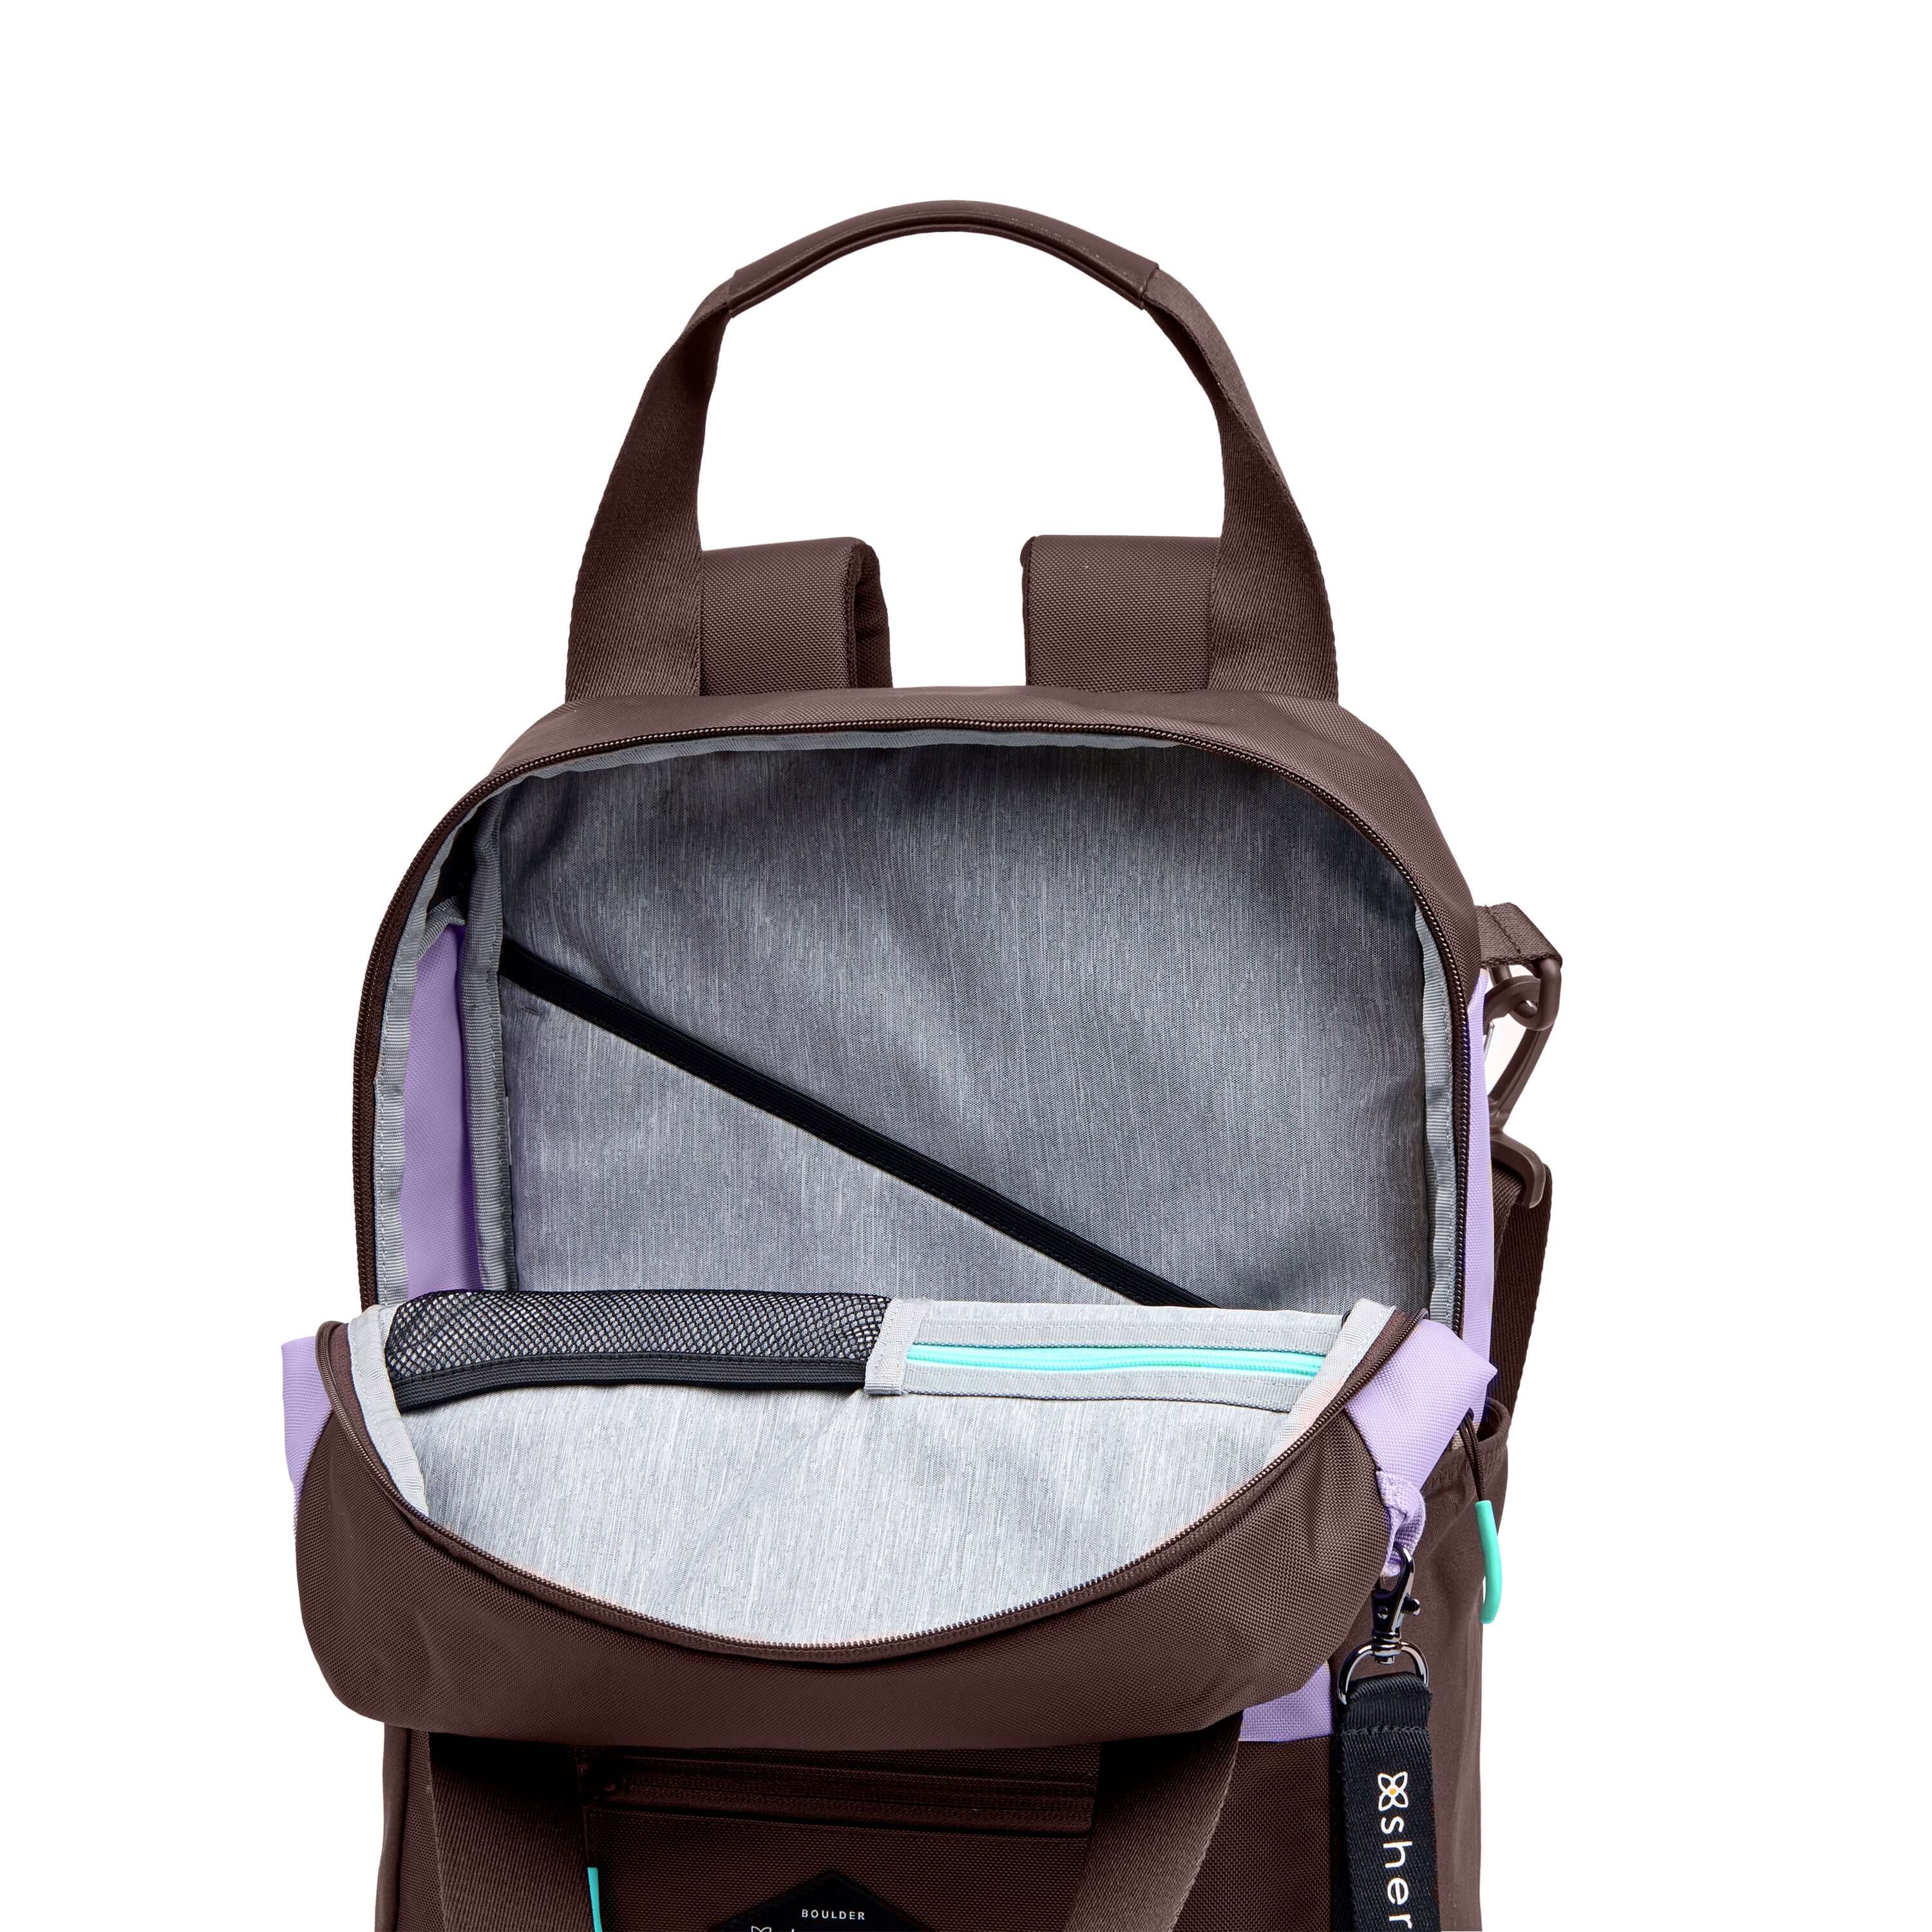 Front view of Sherpani&#39;s three-in-one bag, the Camden in Lavender. The main zipper compartment is open to reveal a light gray interior with a padded laptop sleeve, zipper pocket and mesh pocket.